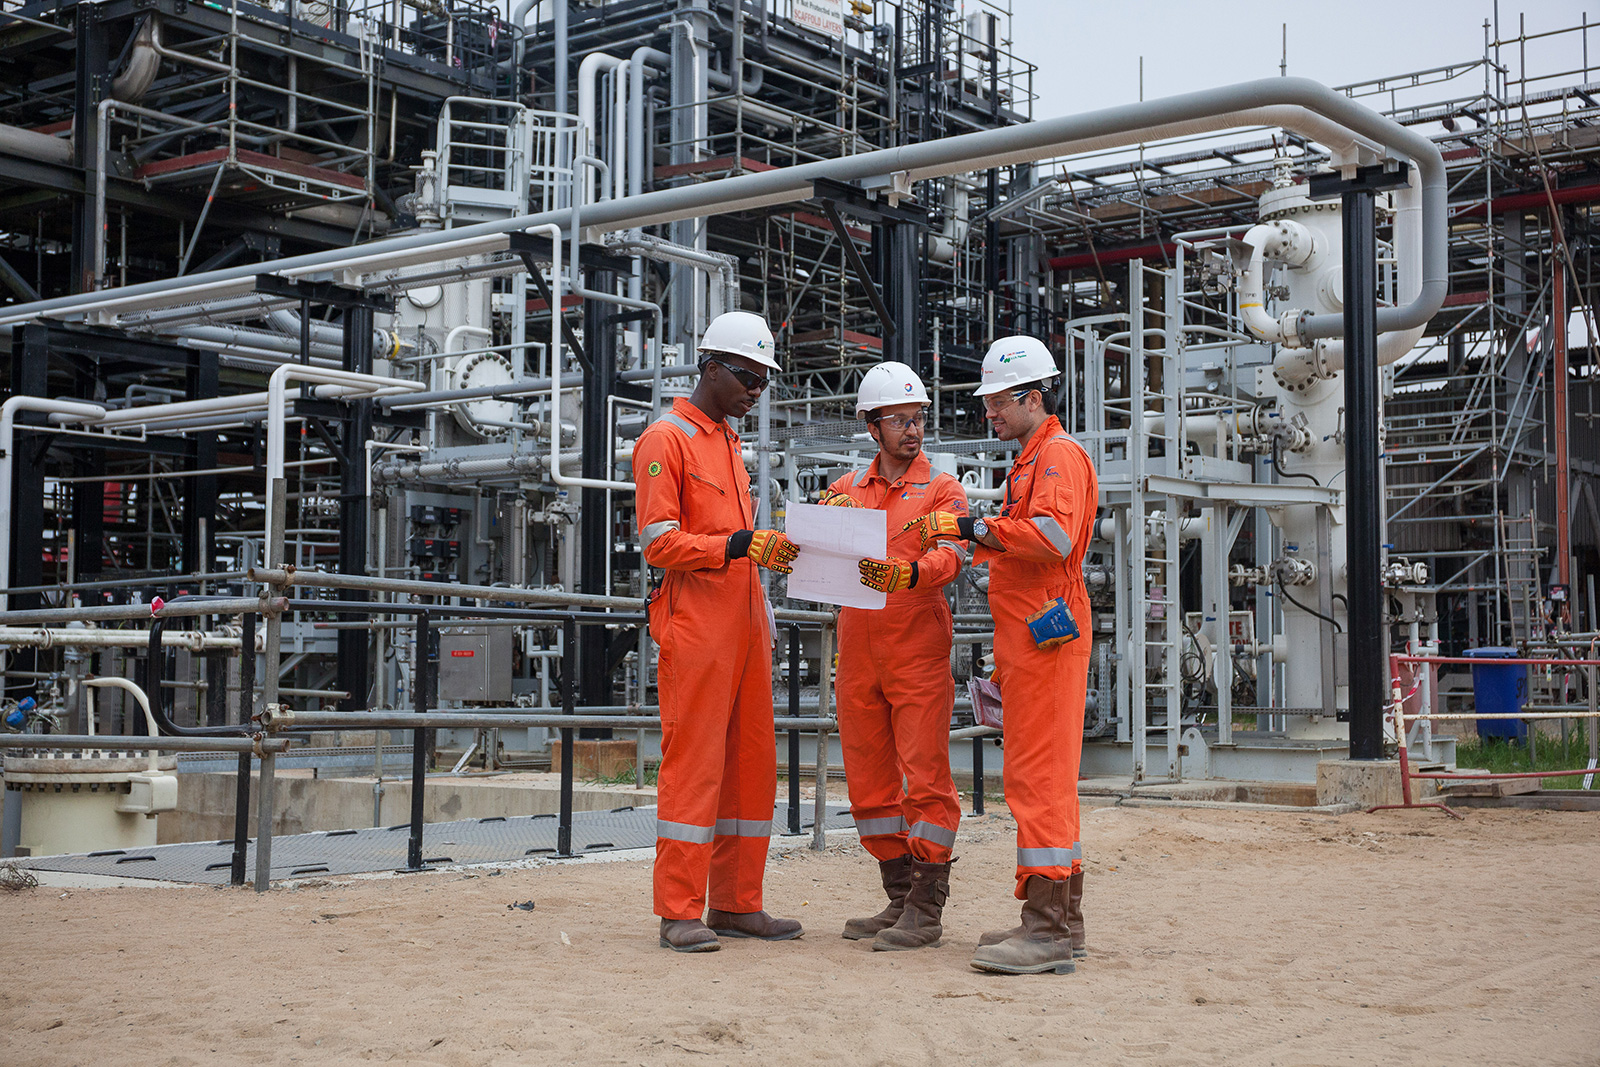 Operators carry out an inspection at a pumping station in Ogbogu, Nigeria.